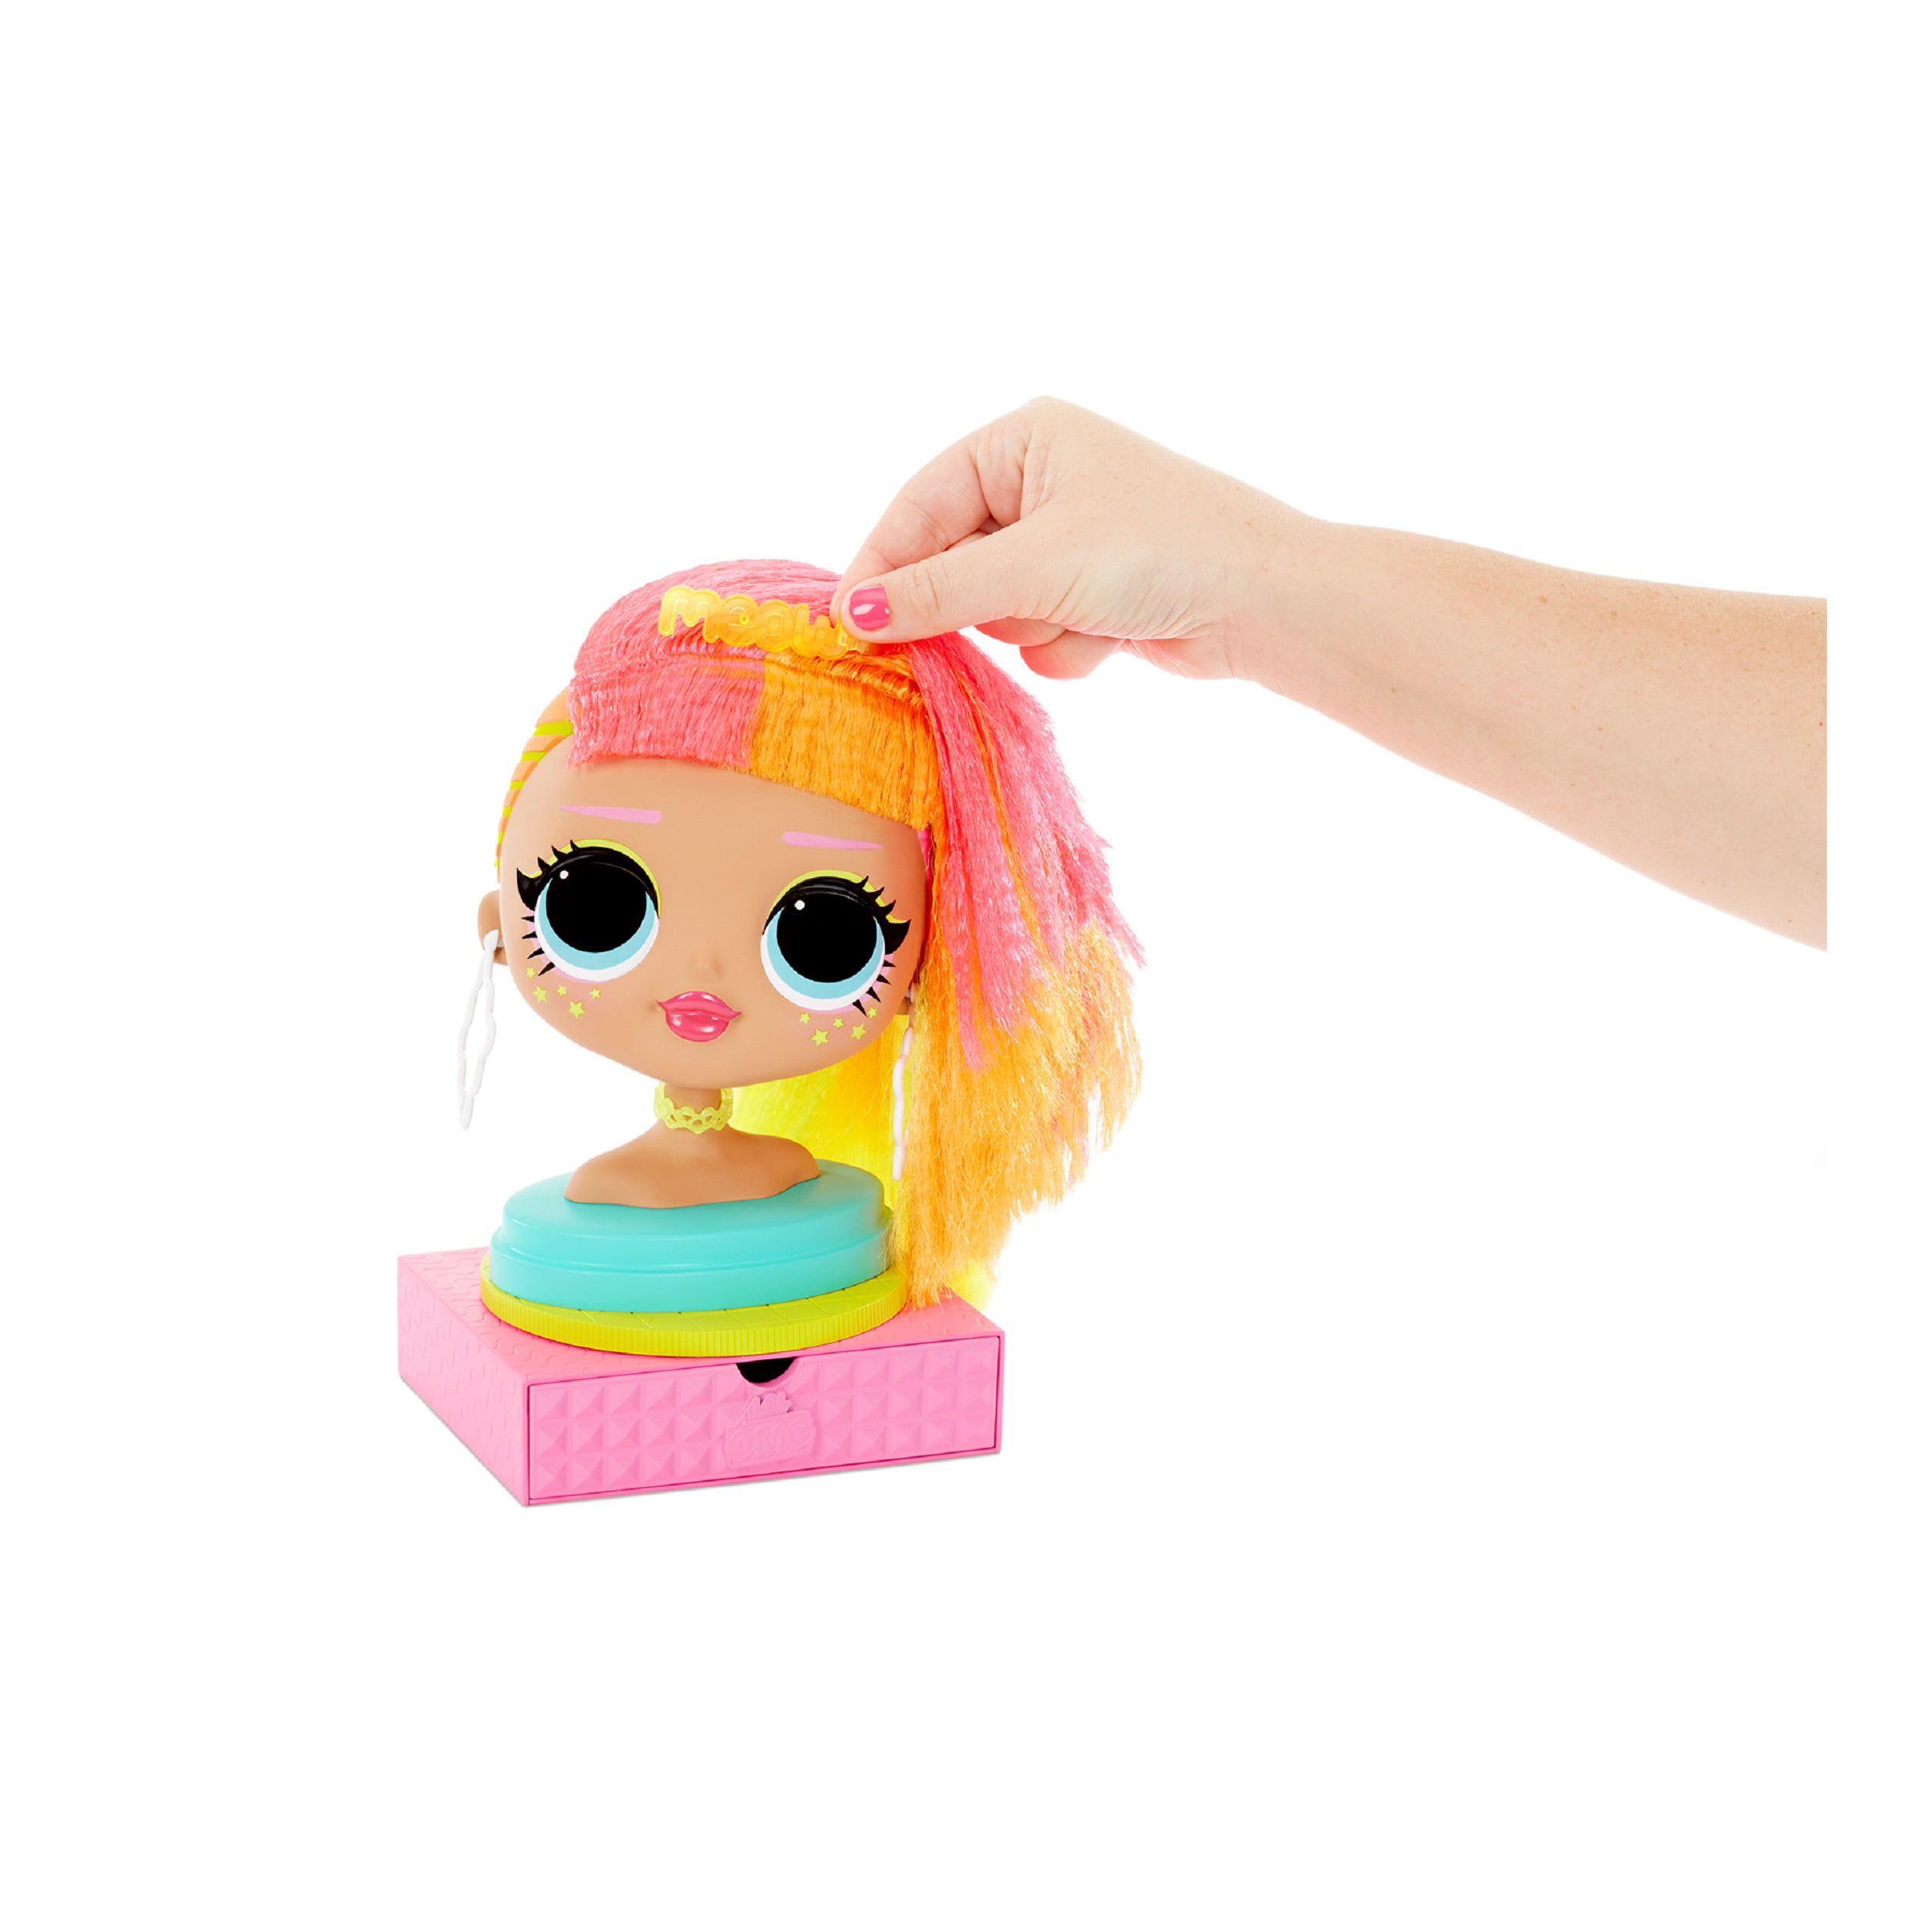 LOL Surprise OMG Neonliscious Neon Styling Head for sale online